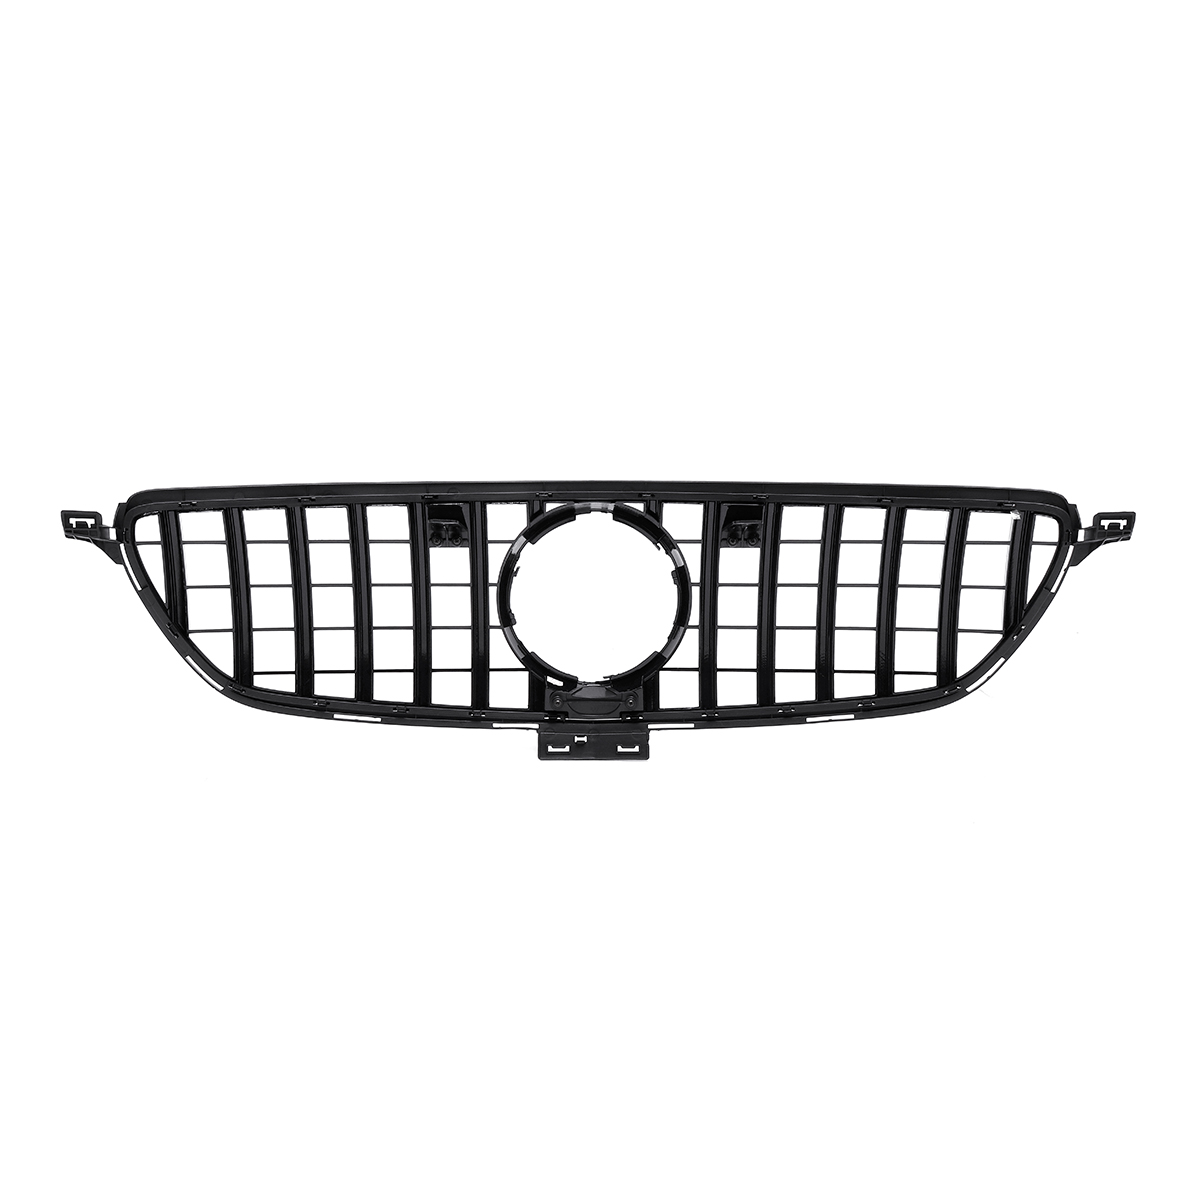 Silver GT Style Front Grille Grill for Mercedes Benz GLE Coupe W292 C292 GLE350 2016-2018